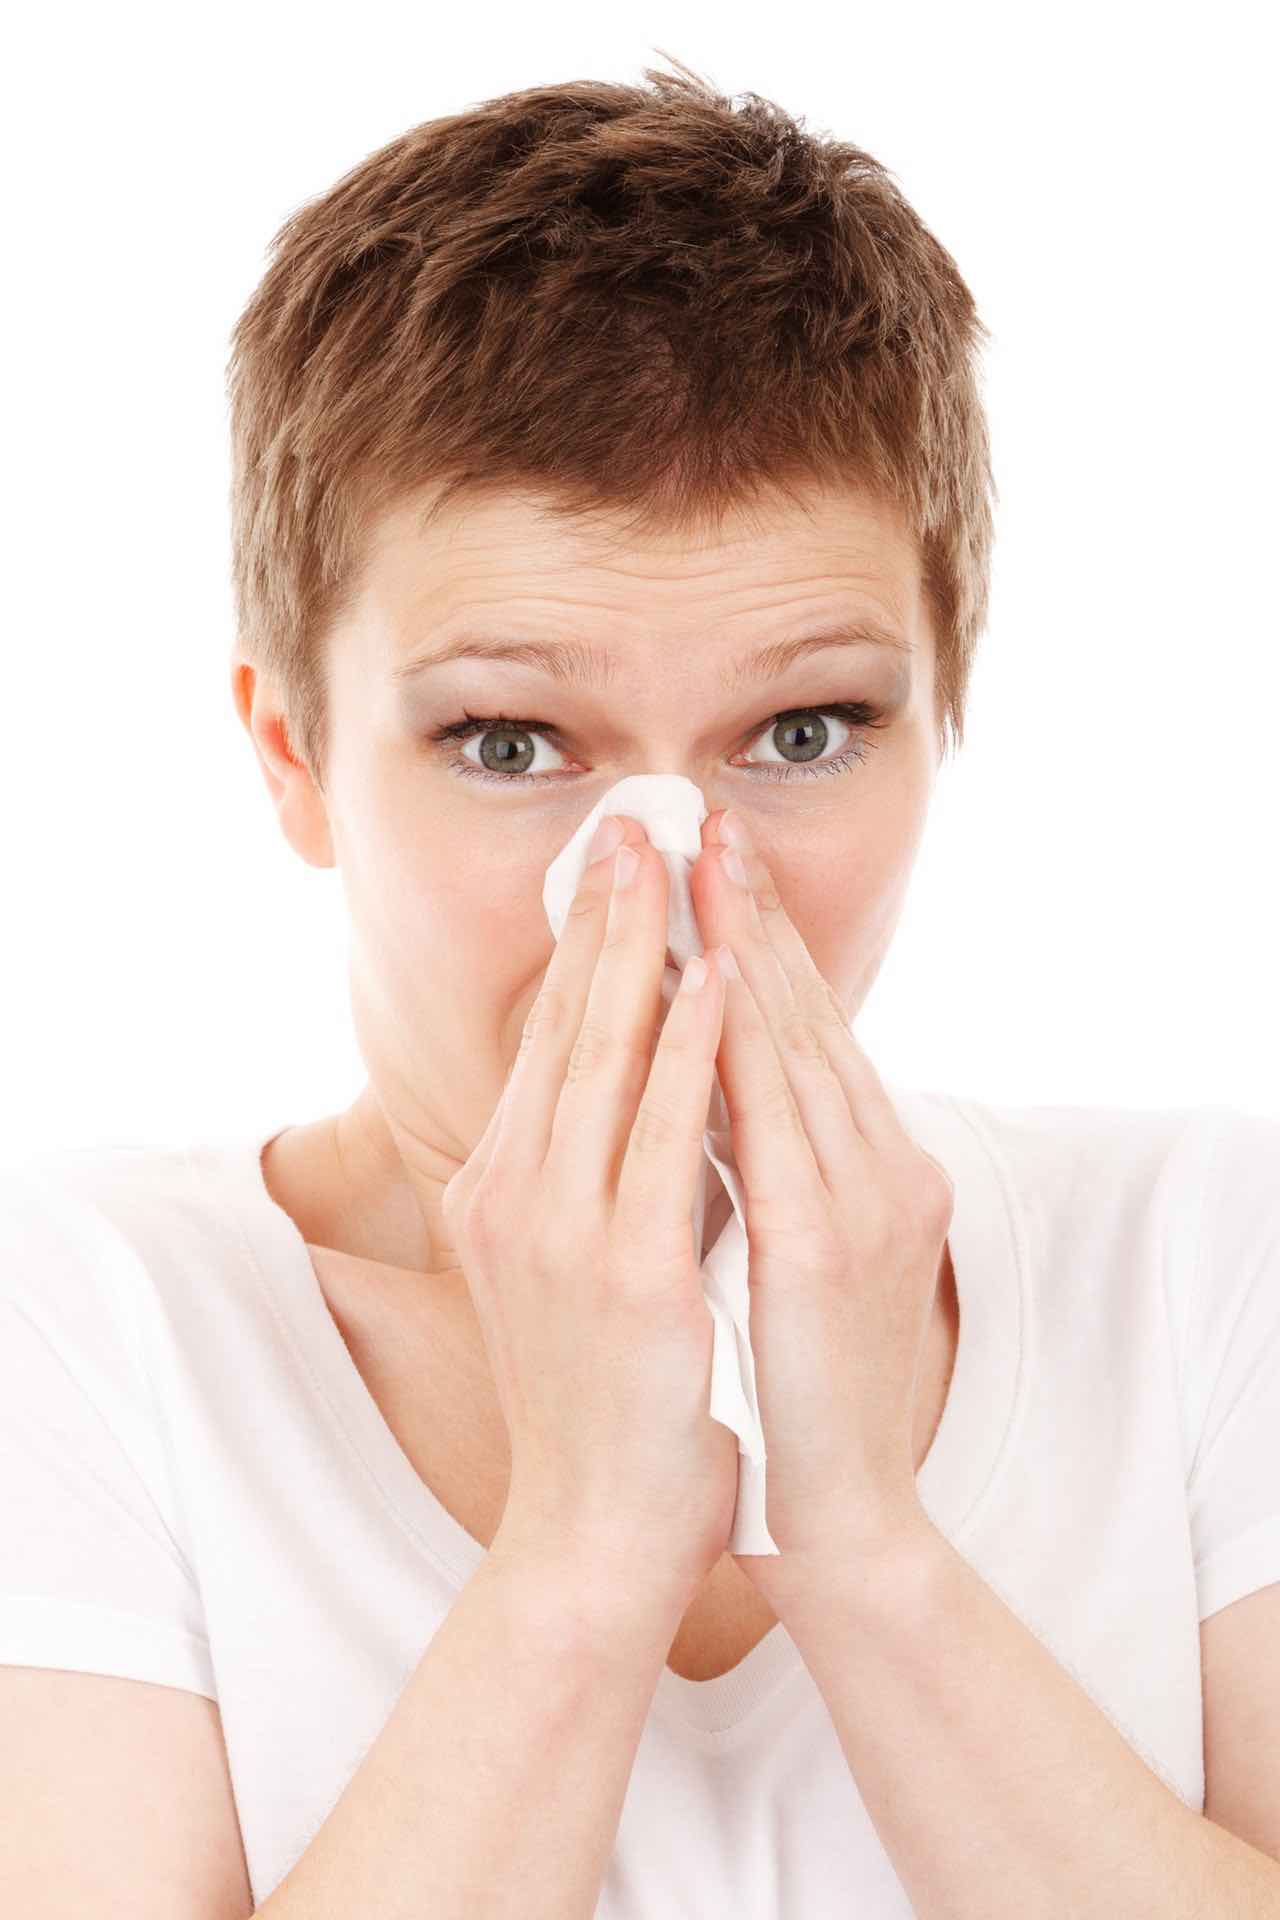 Tips on living in an allergy free home